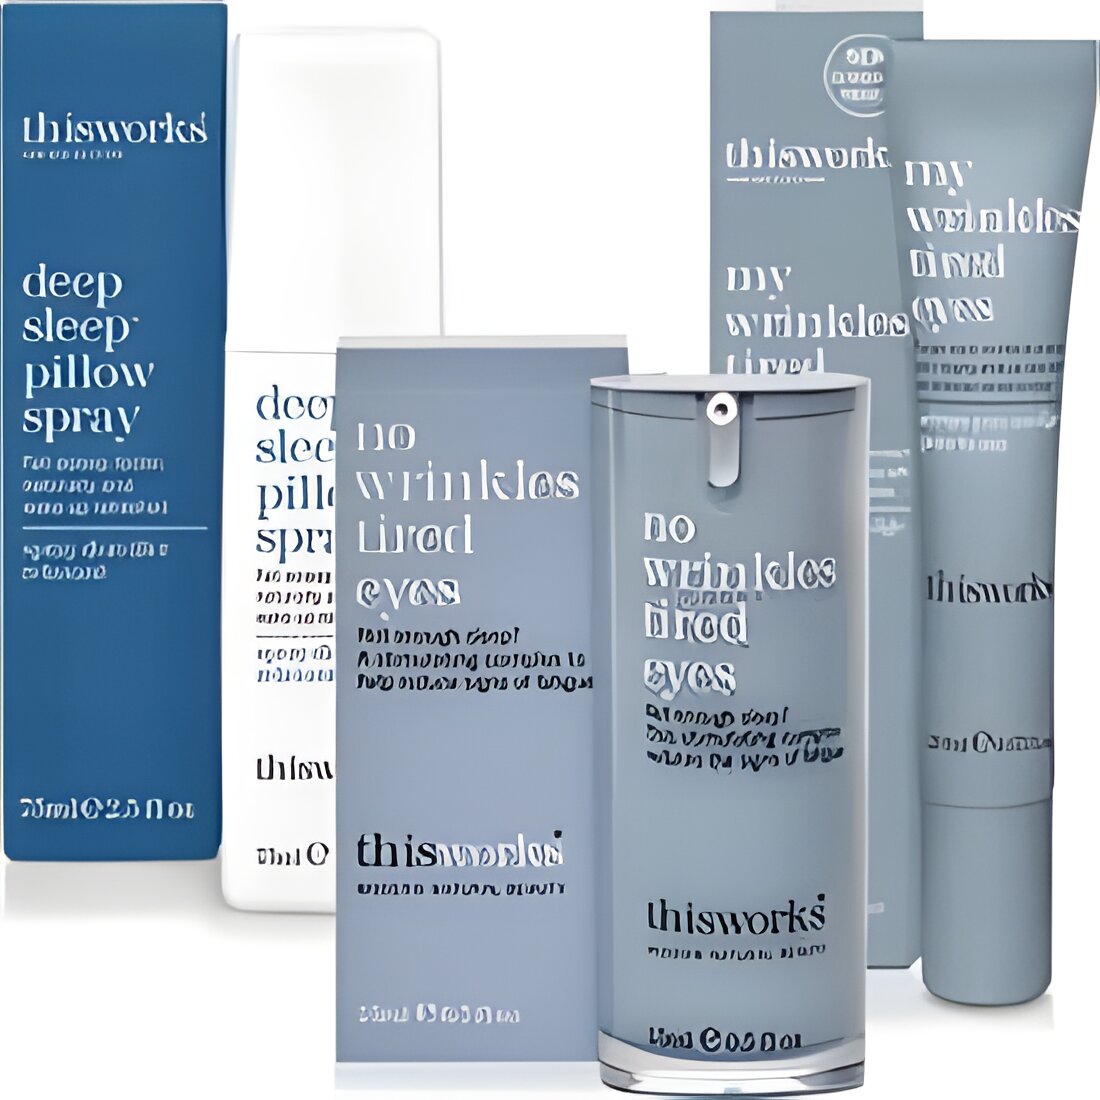 Free ThisWorks Beauty Kit